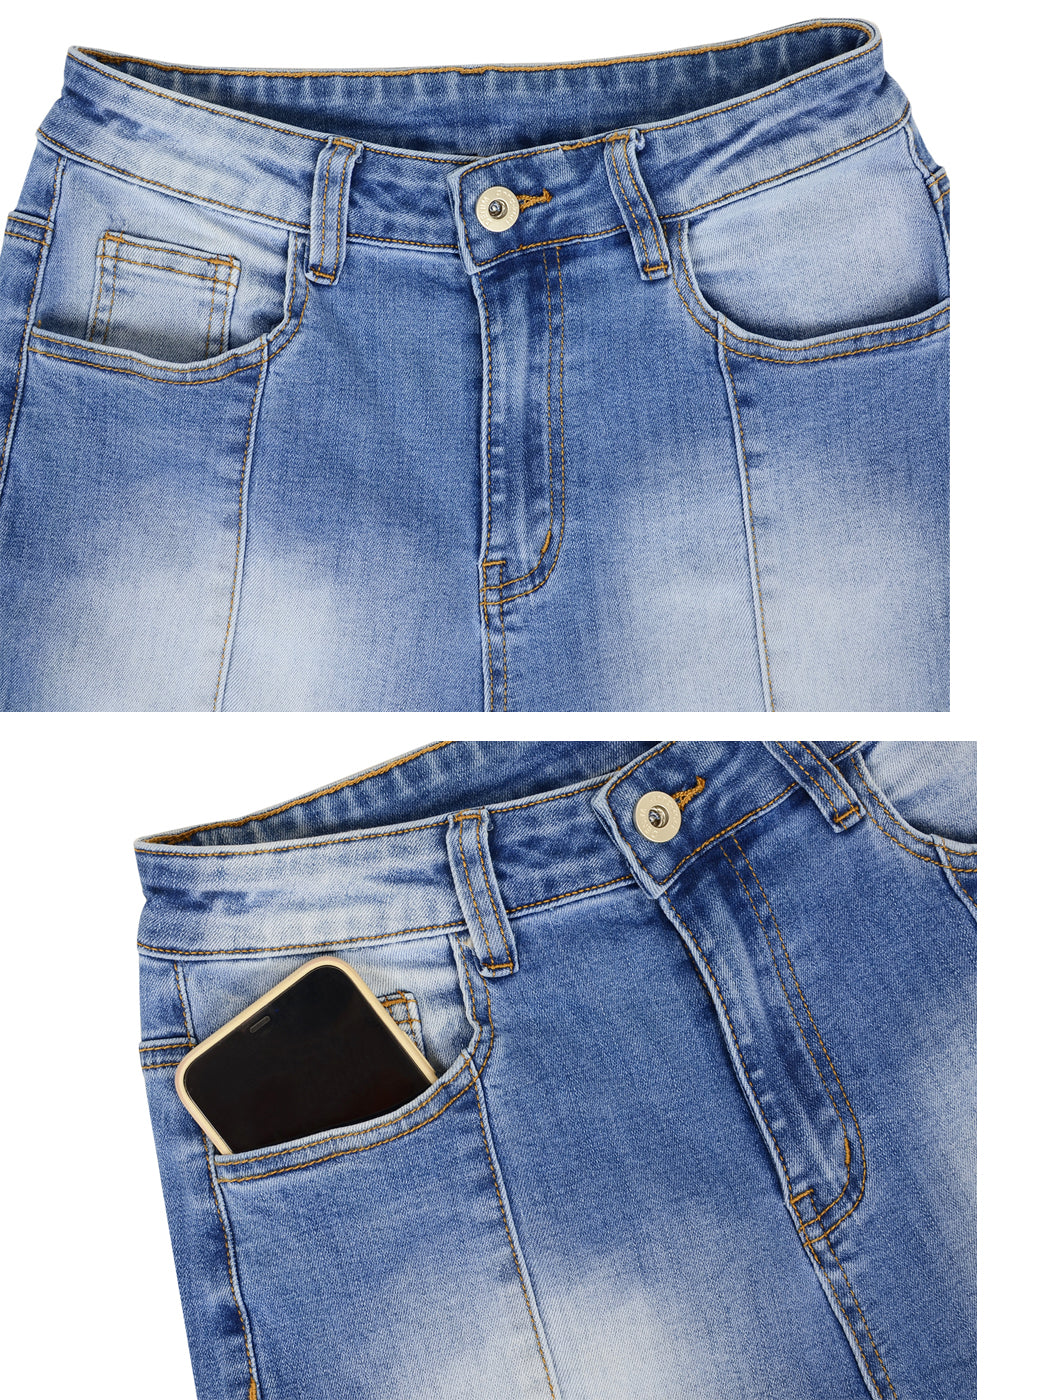 High Waist Elastic Denim High Waisted Skinny Jeans For Women Stretchy,  Skinny, And Casual Pencil Pants In Plus Size From Luote, $16.28 | DHgate.Com